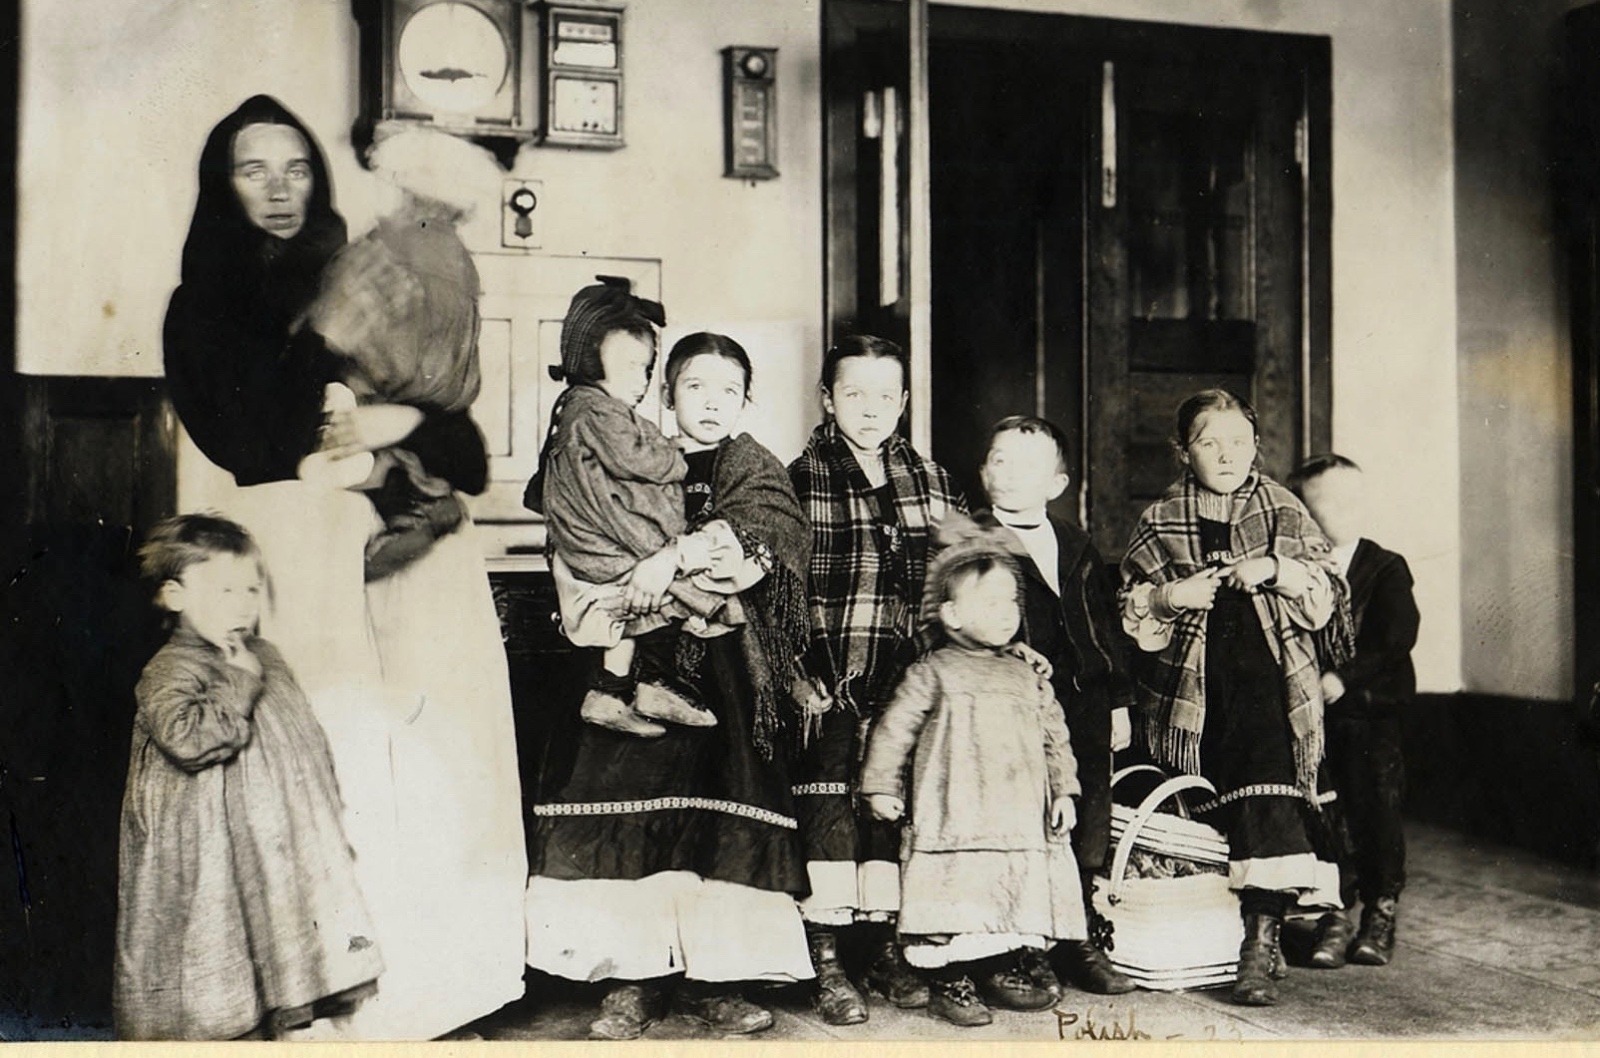 A Polish immigrant mother, not of great means or education, and her nine children pass through Ellis Island. Photograph courtesy National Park Service